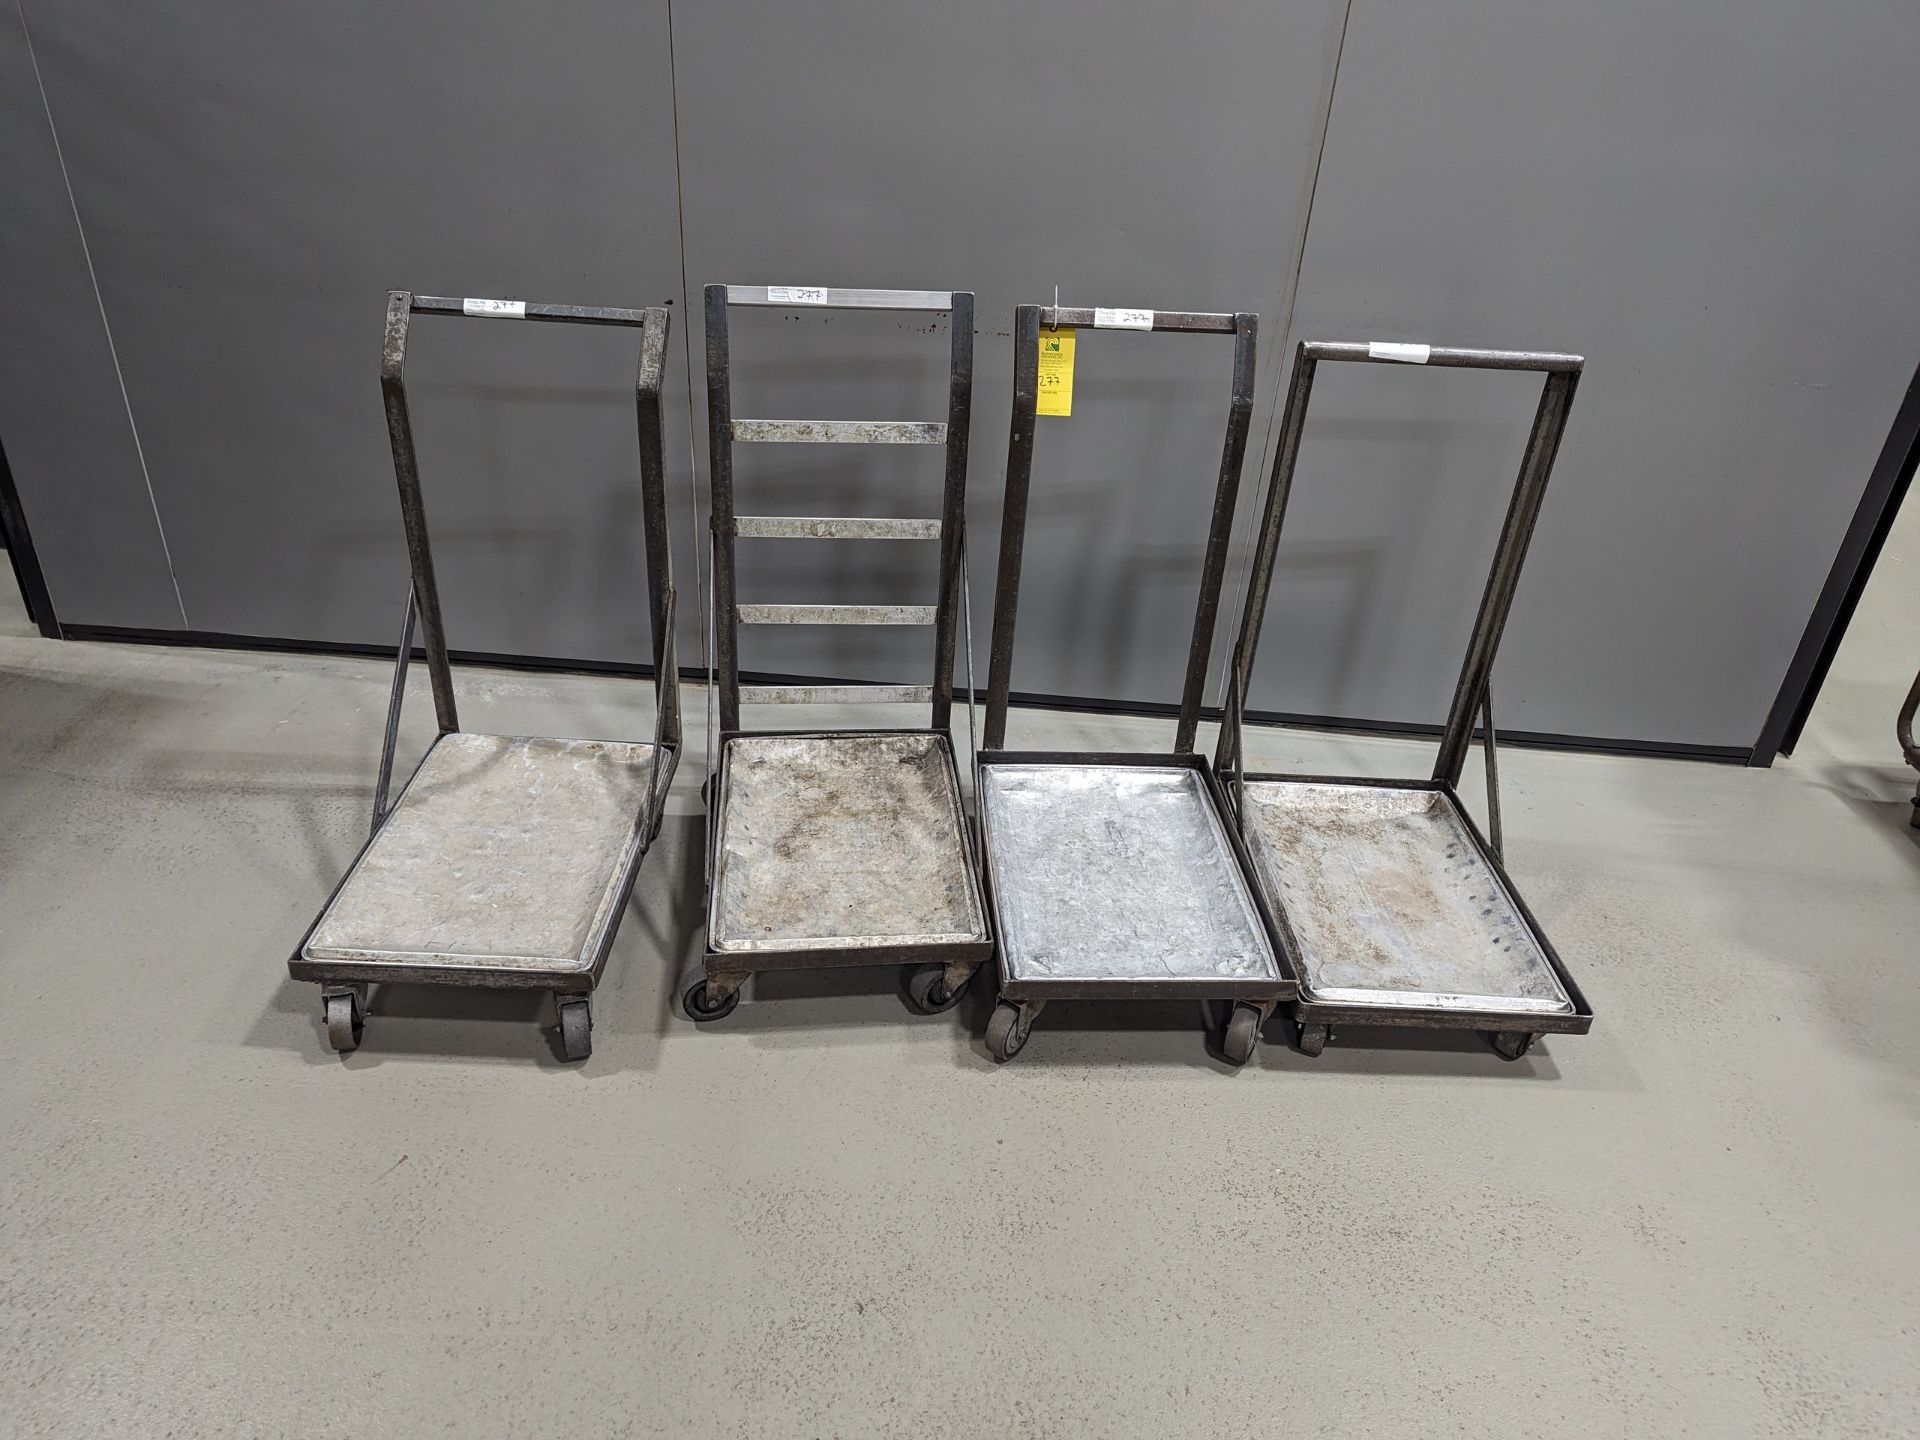 Lot of 4 Pan Carts, Dimensions LxWxH: 30x28x48 Each is 30x19x42